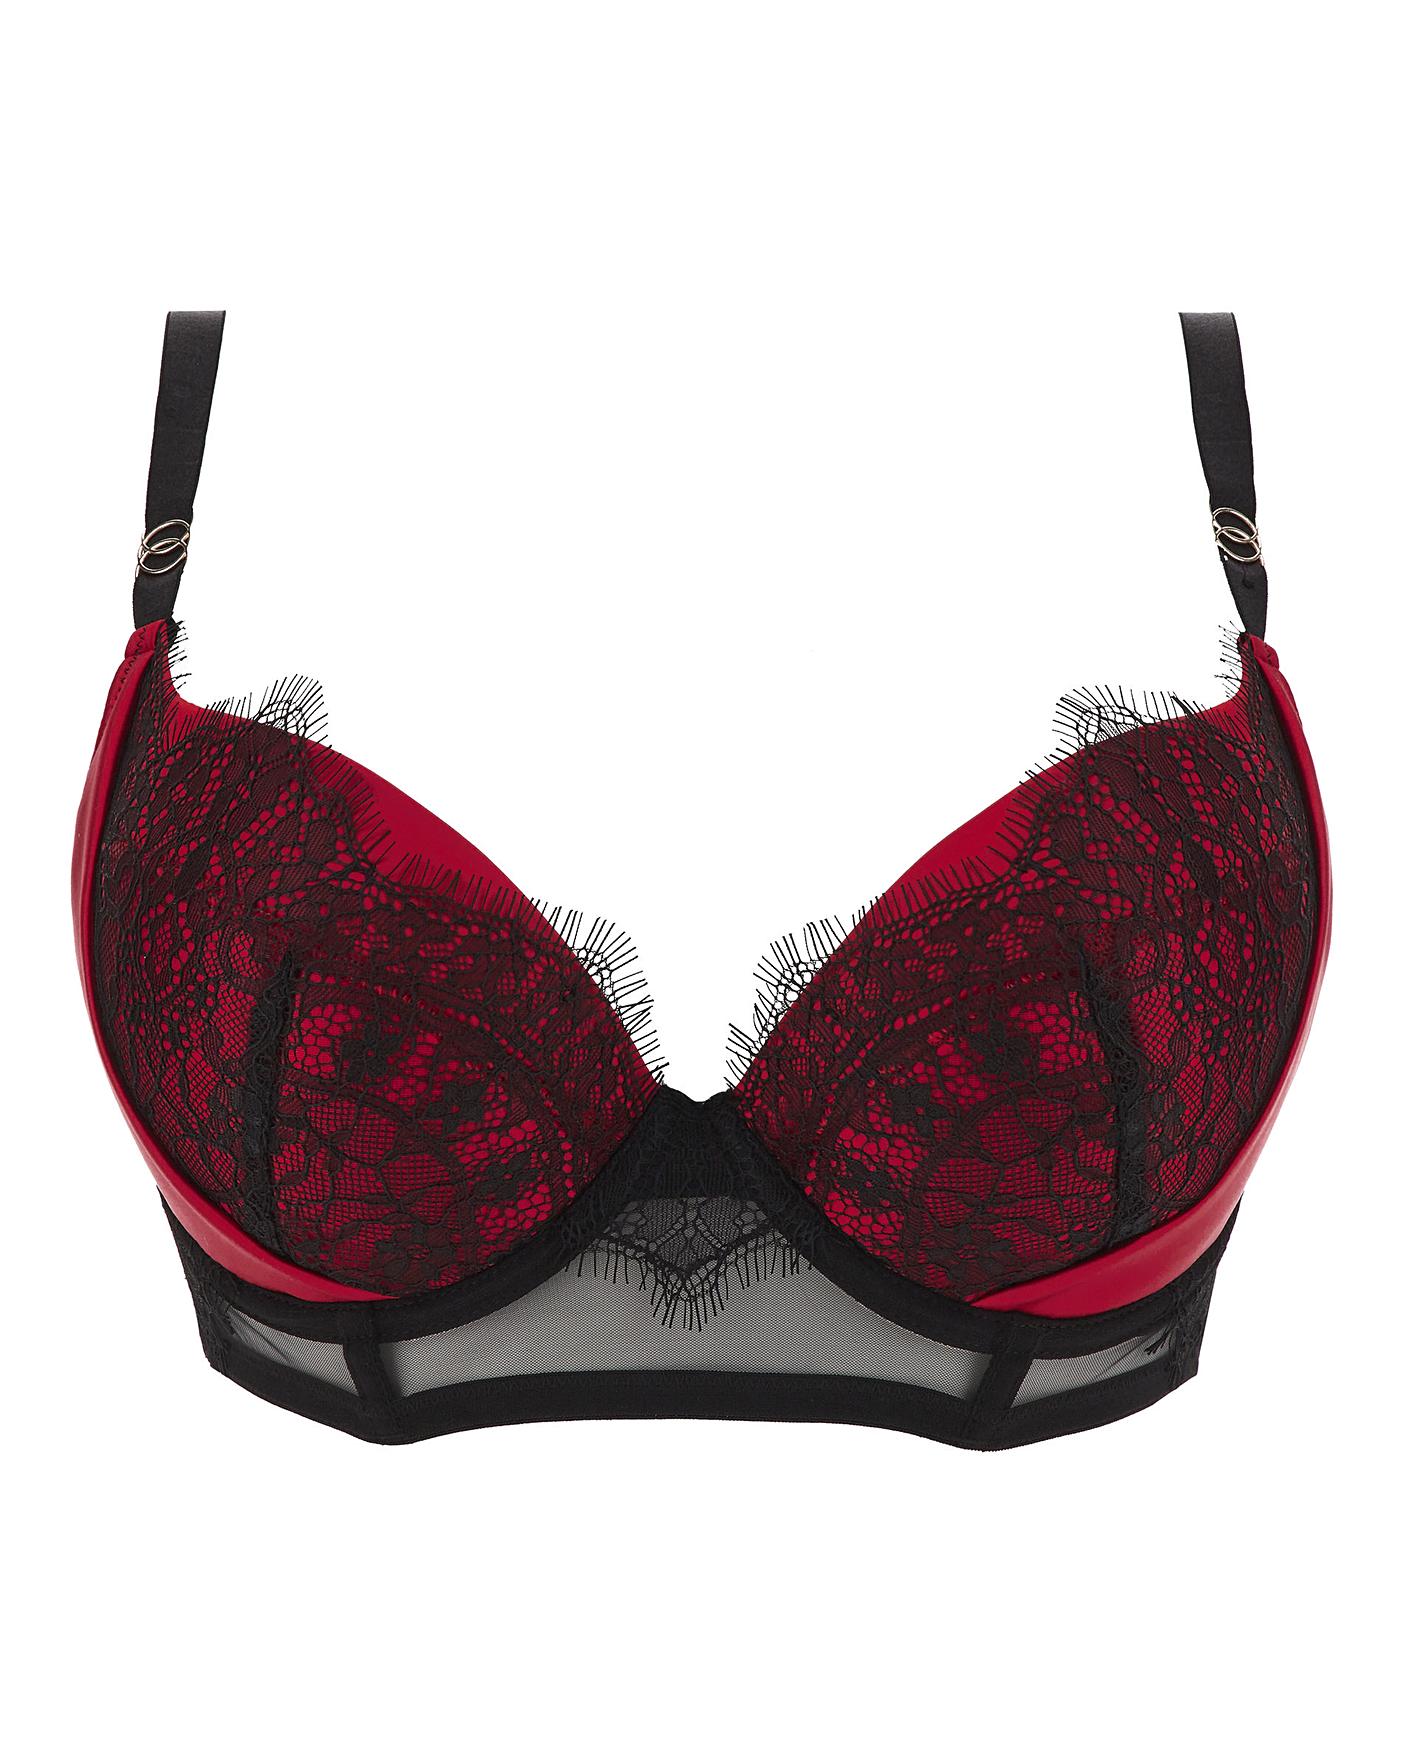 Ann Summers Siren Lace Plunge Bra | Oxendales